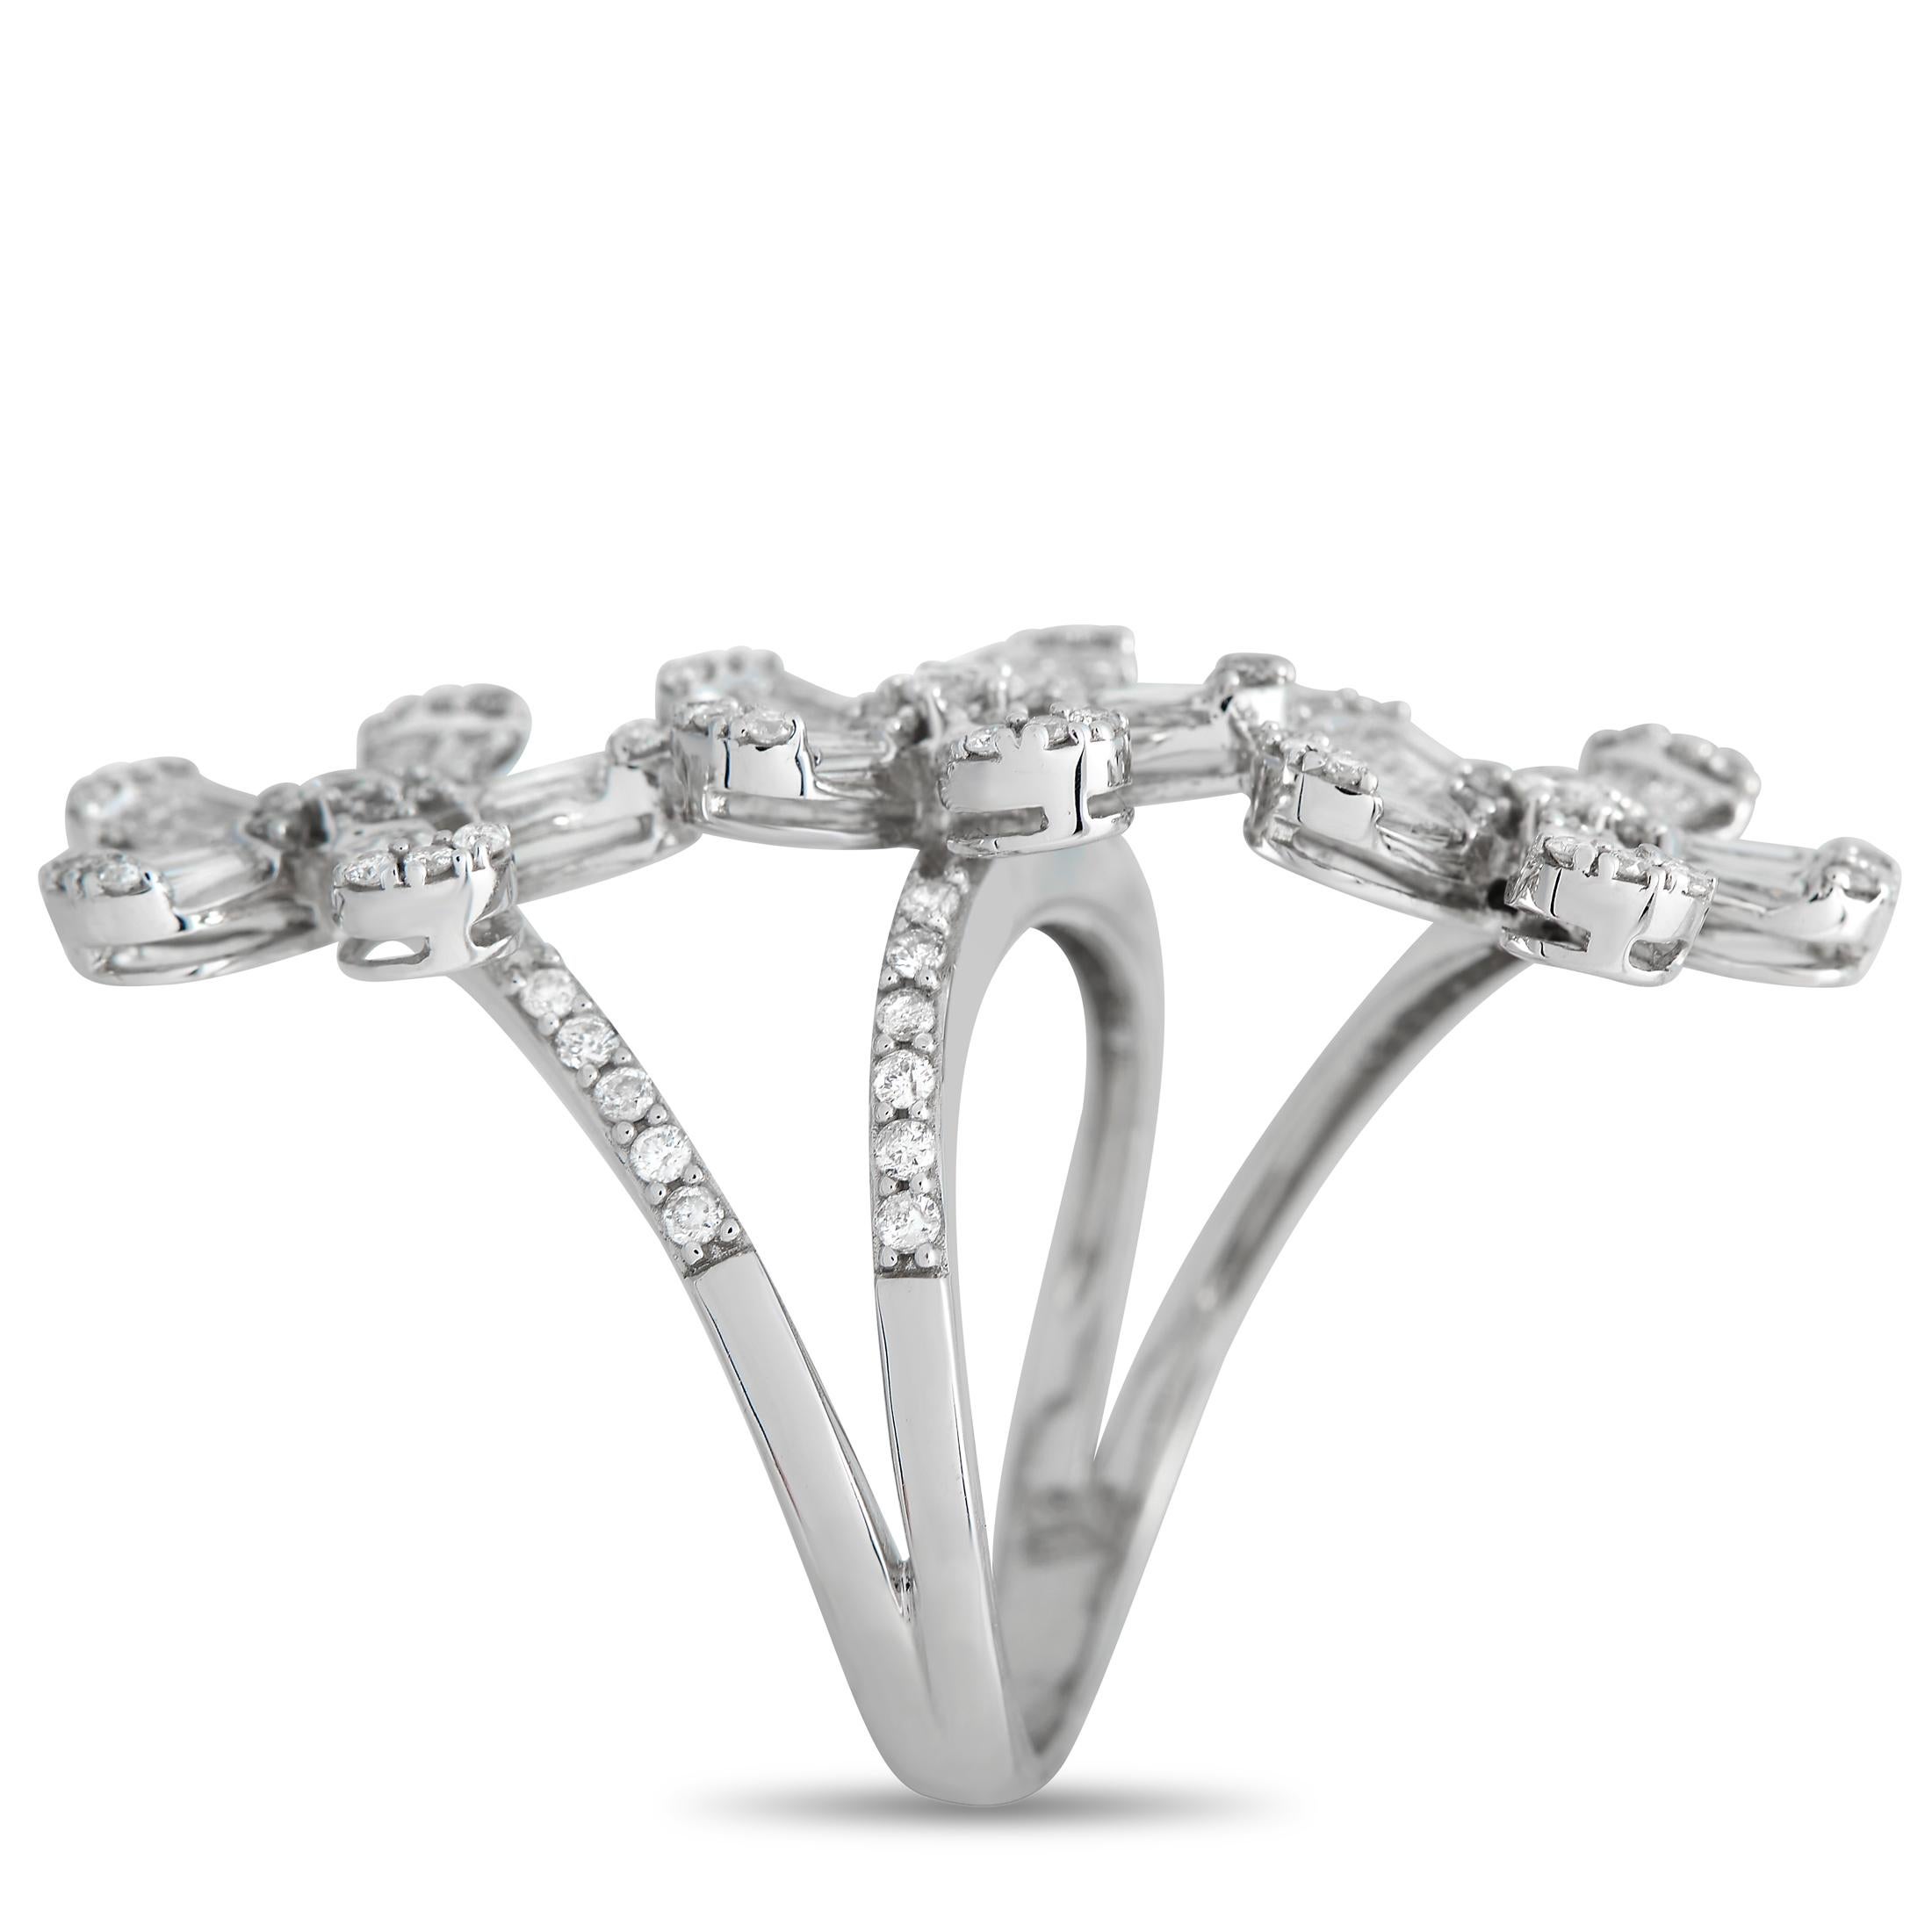 A chic bling sure to make any outfit look more interesting. This 14K white gold ring is designed with a split shank and three oversized floral centerpieces. The slim white gold band has its shoulders traced with round diamonds. Stemming from the